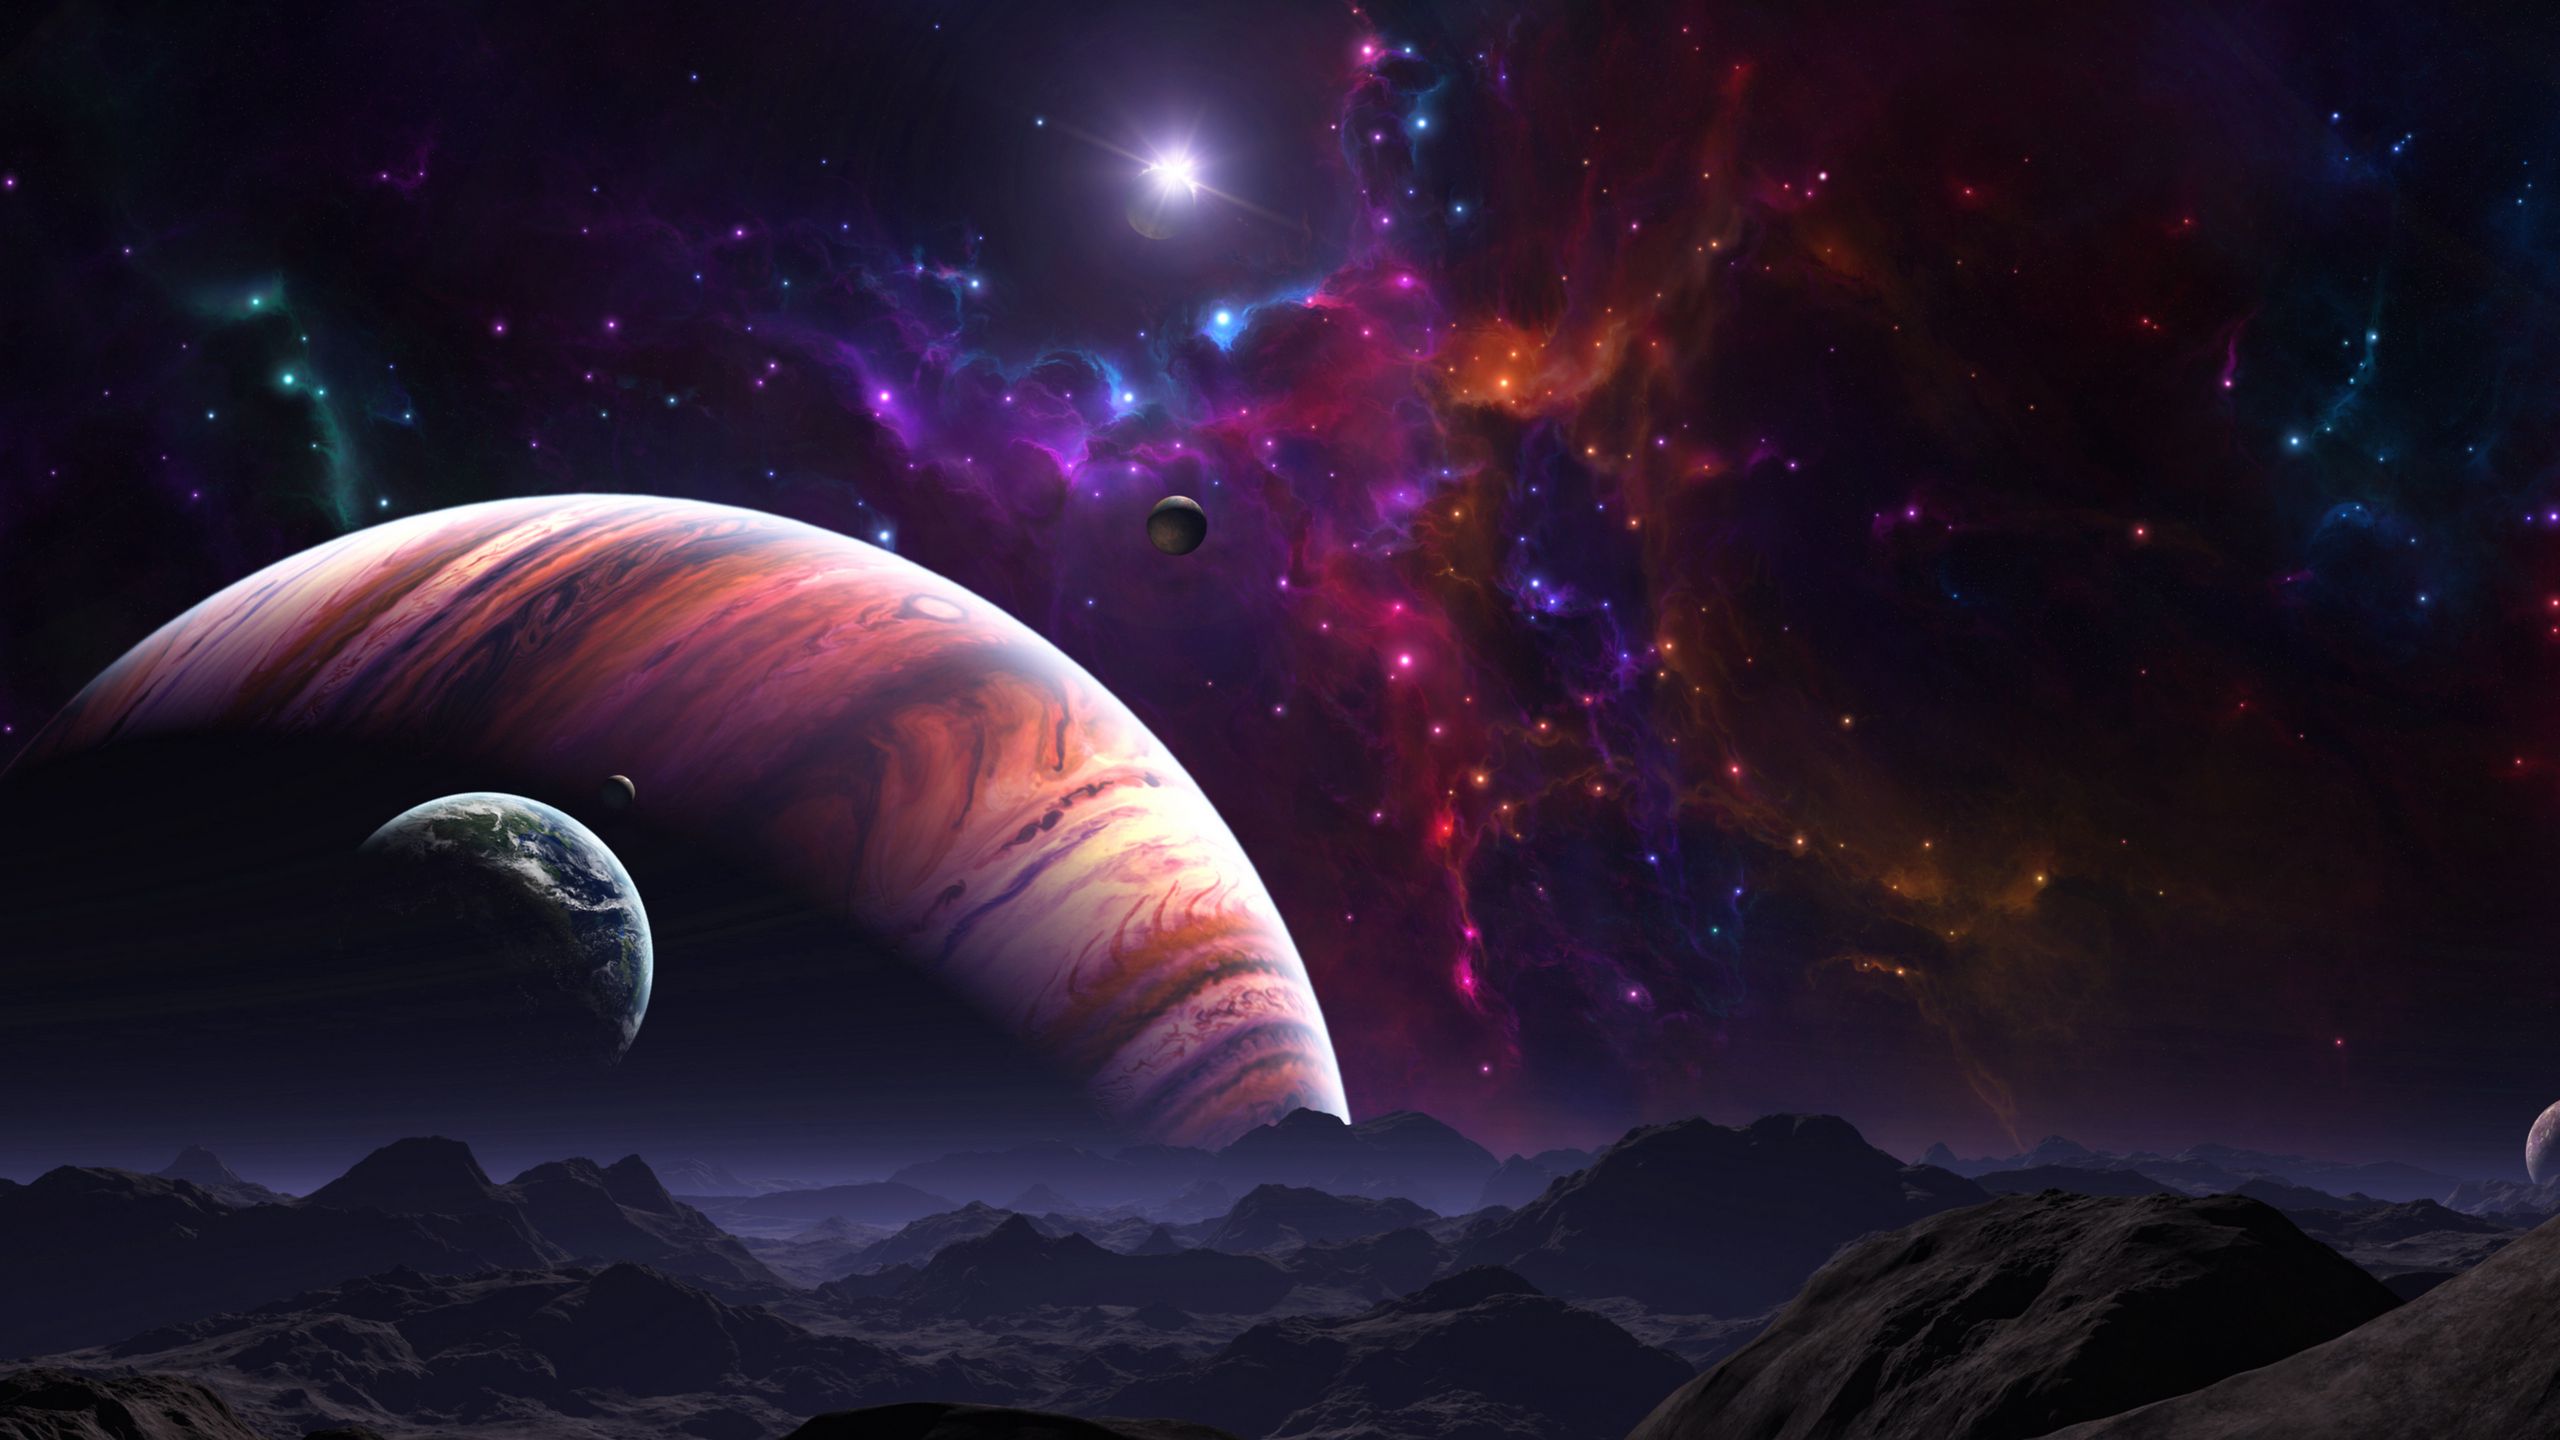 Download wallpaper 2560x1440 space, open space, planets, art, colorful widescreen 16:9 HD background